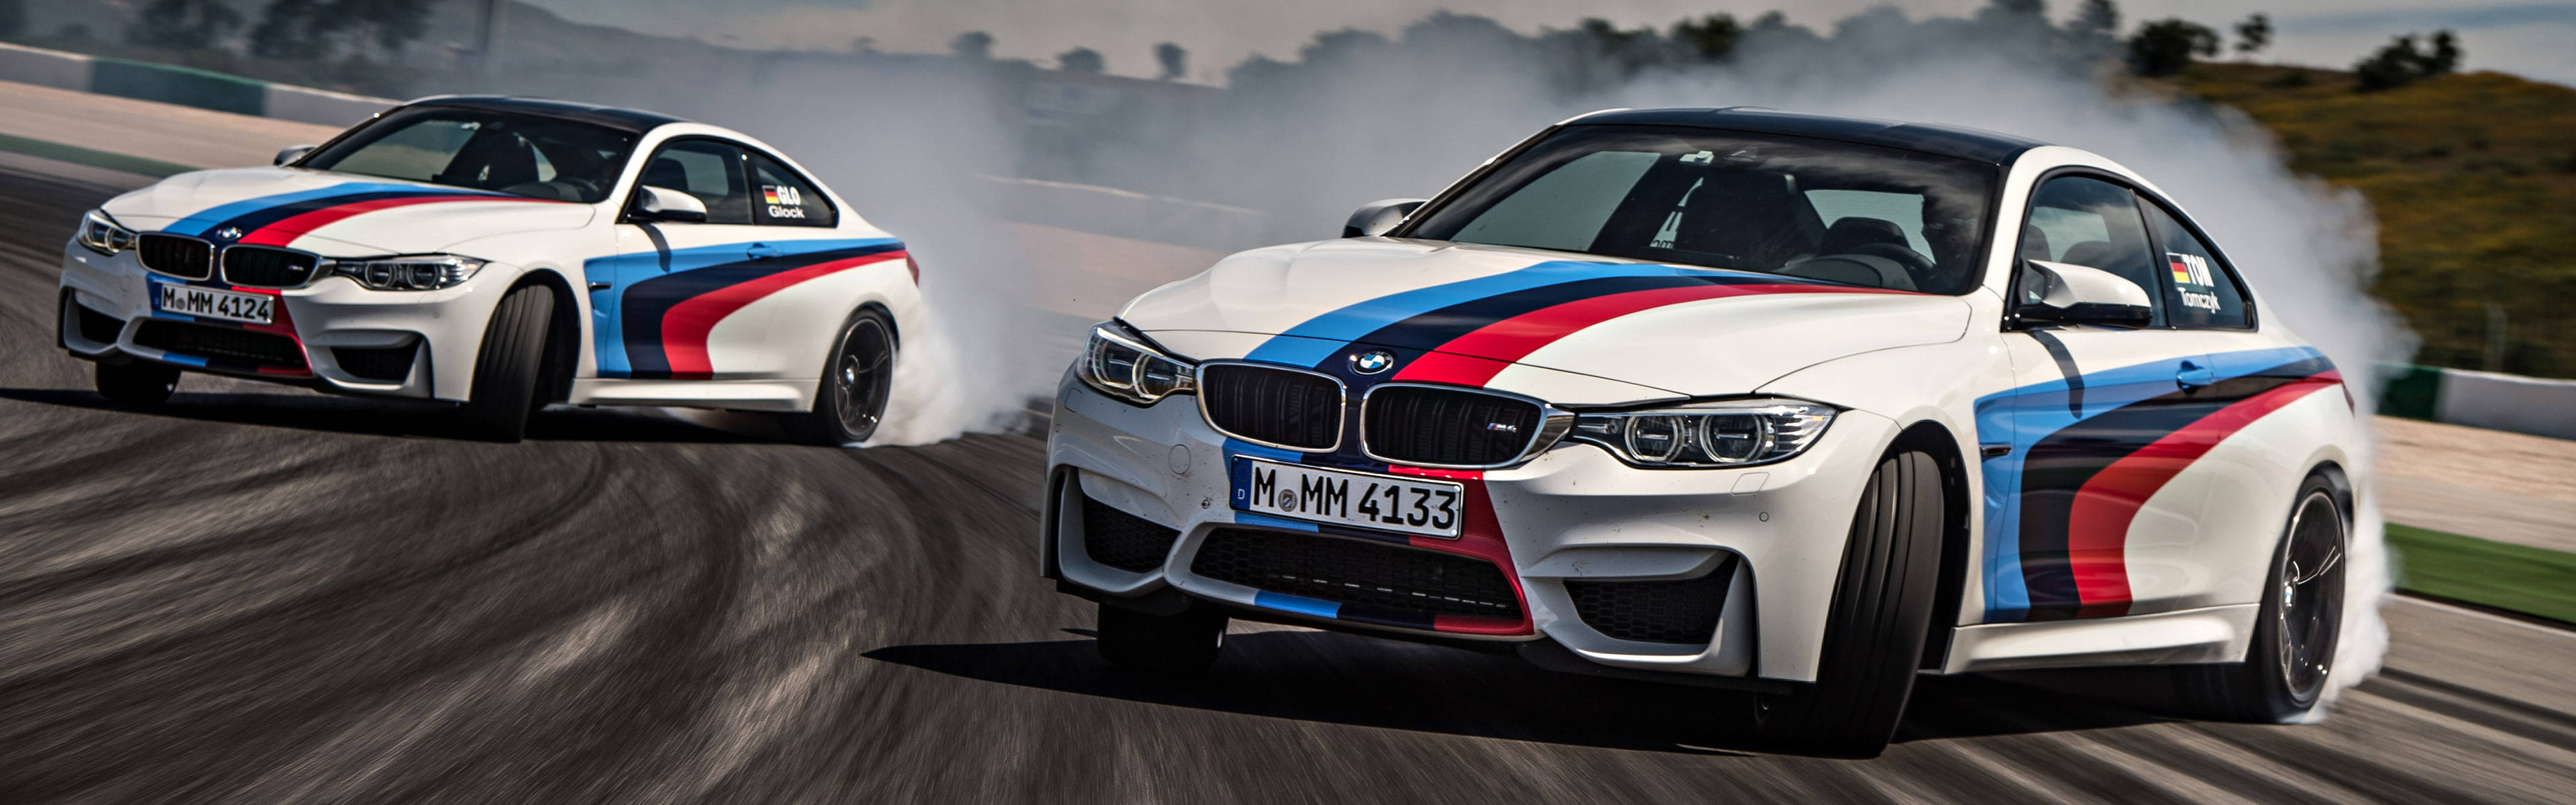 The Thrilling Ride Of A Bmw M4 Drift Car On The Track Wallpaper